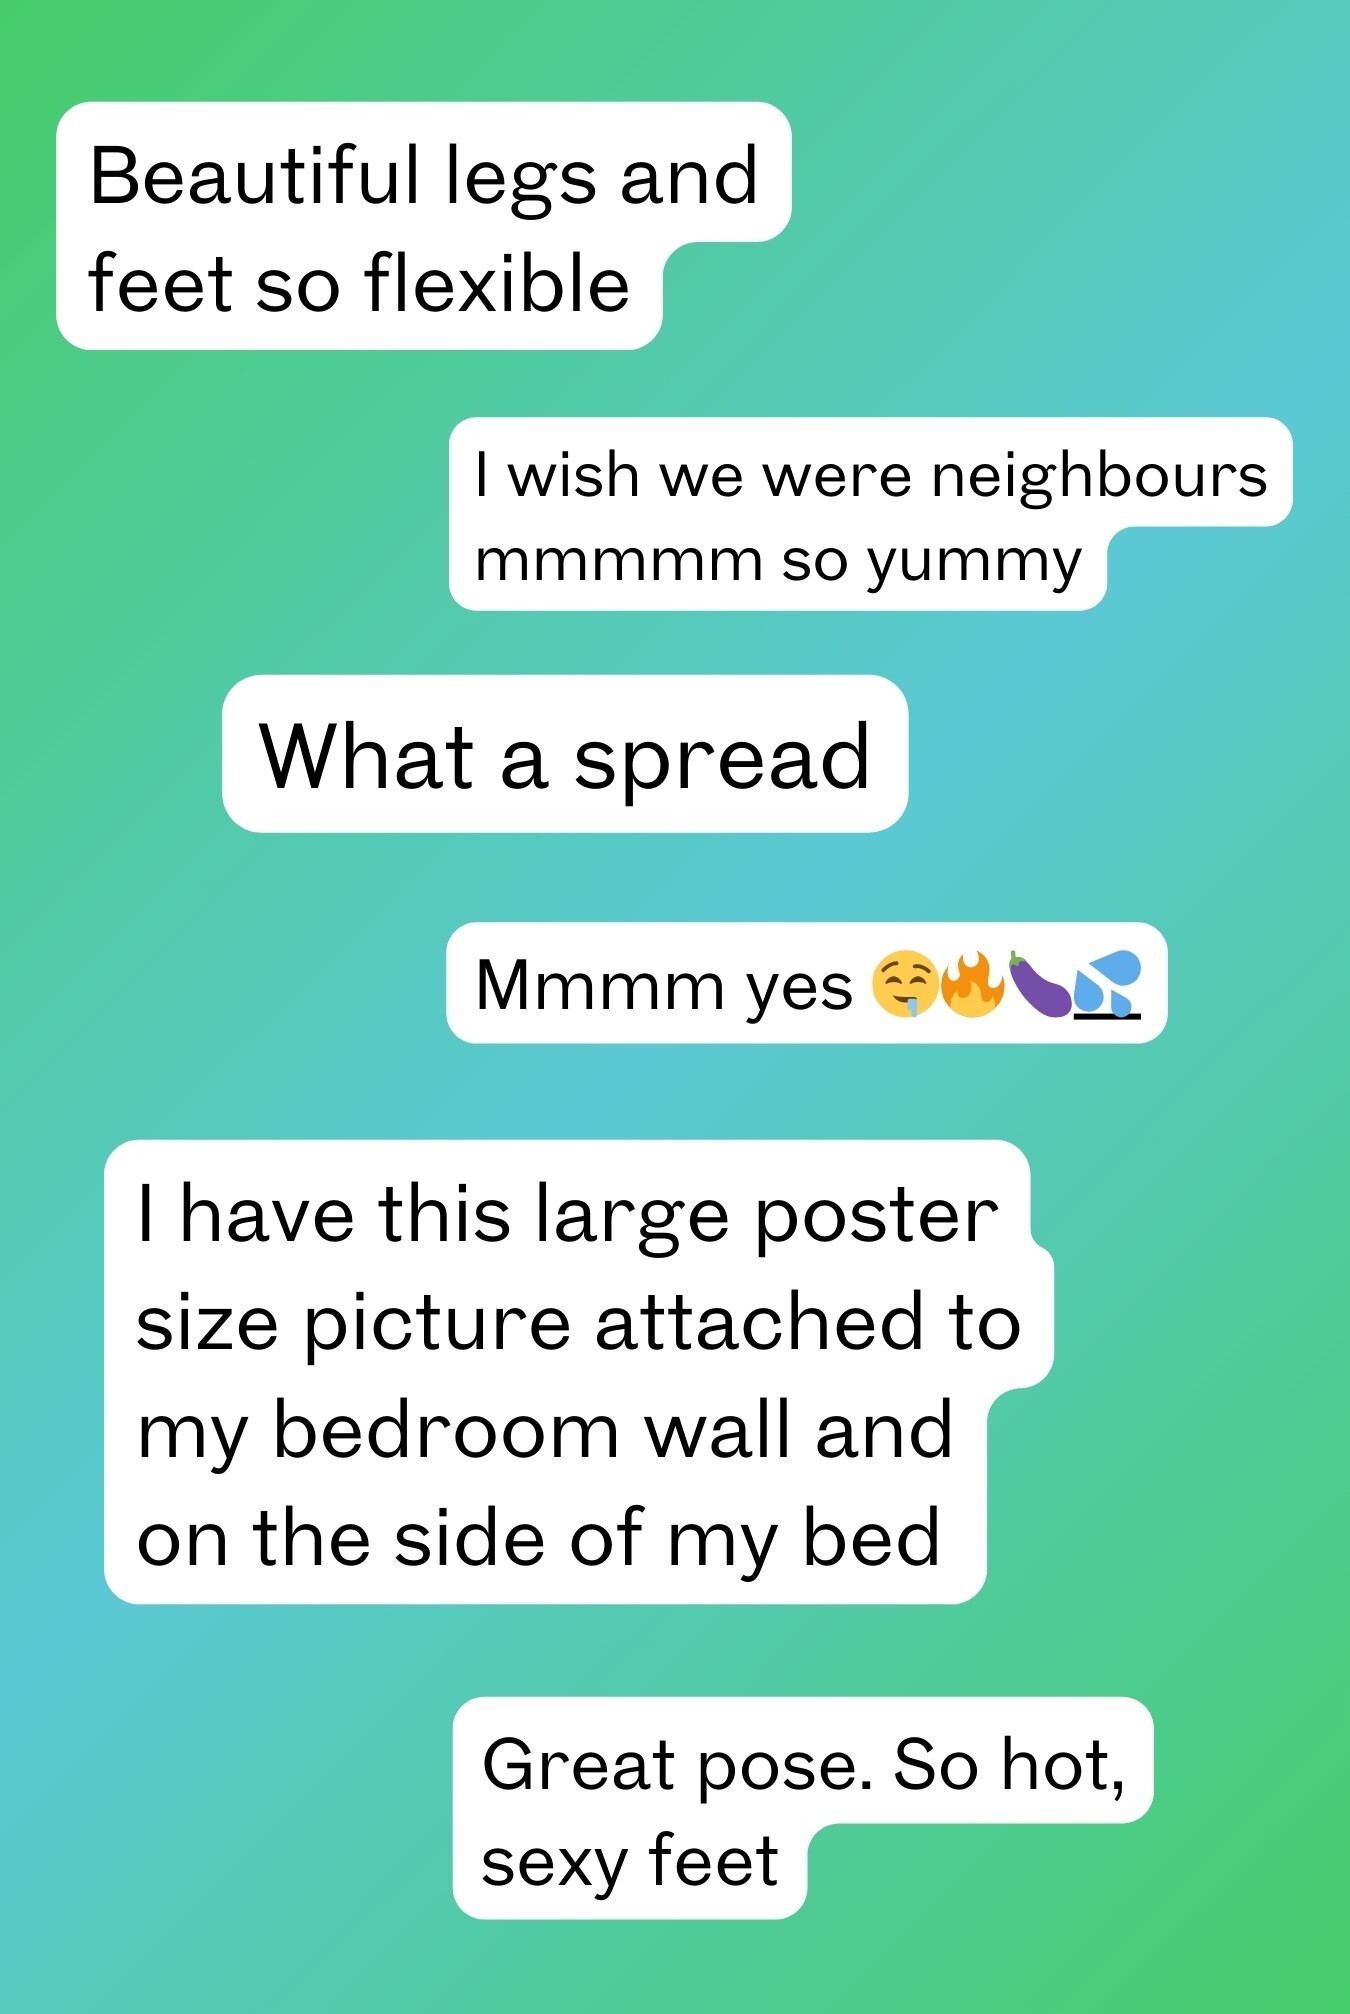 Comments including "what a spread", "mmmm yes" and "I have this large poster size".